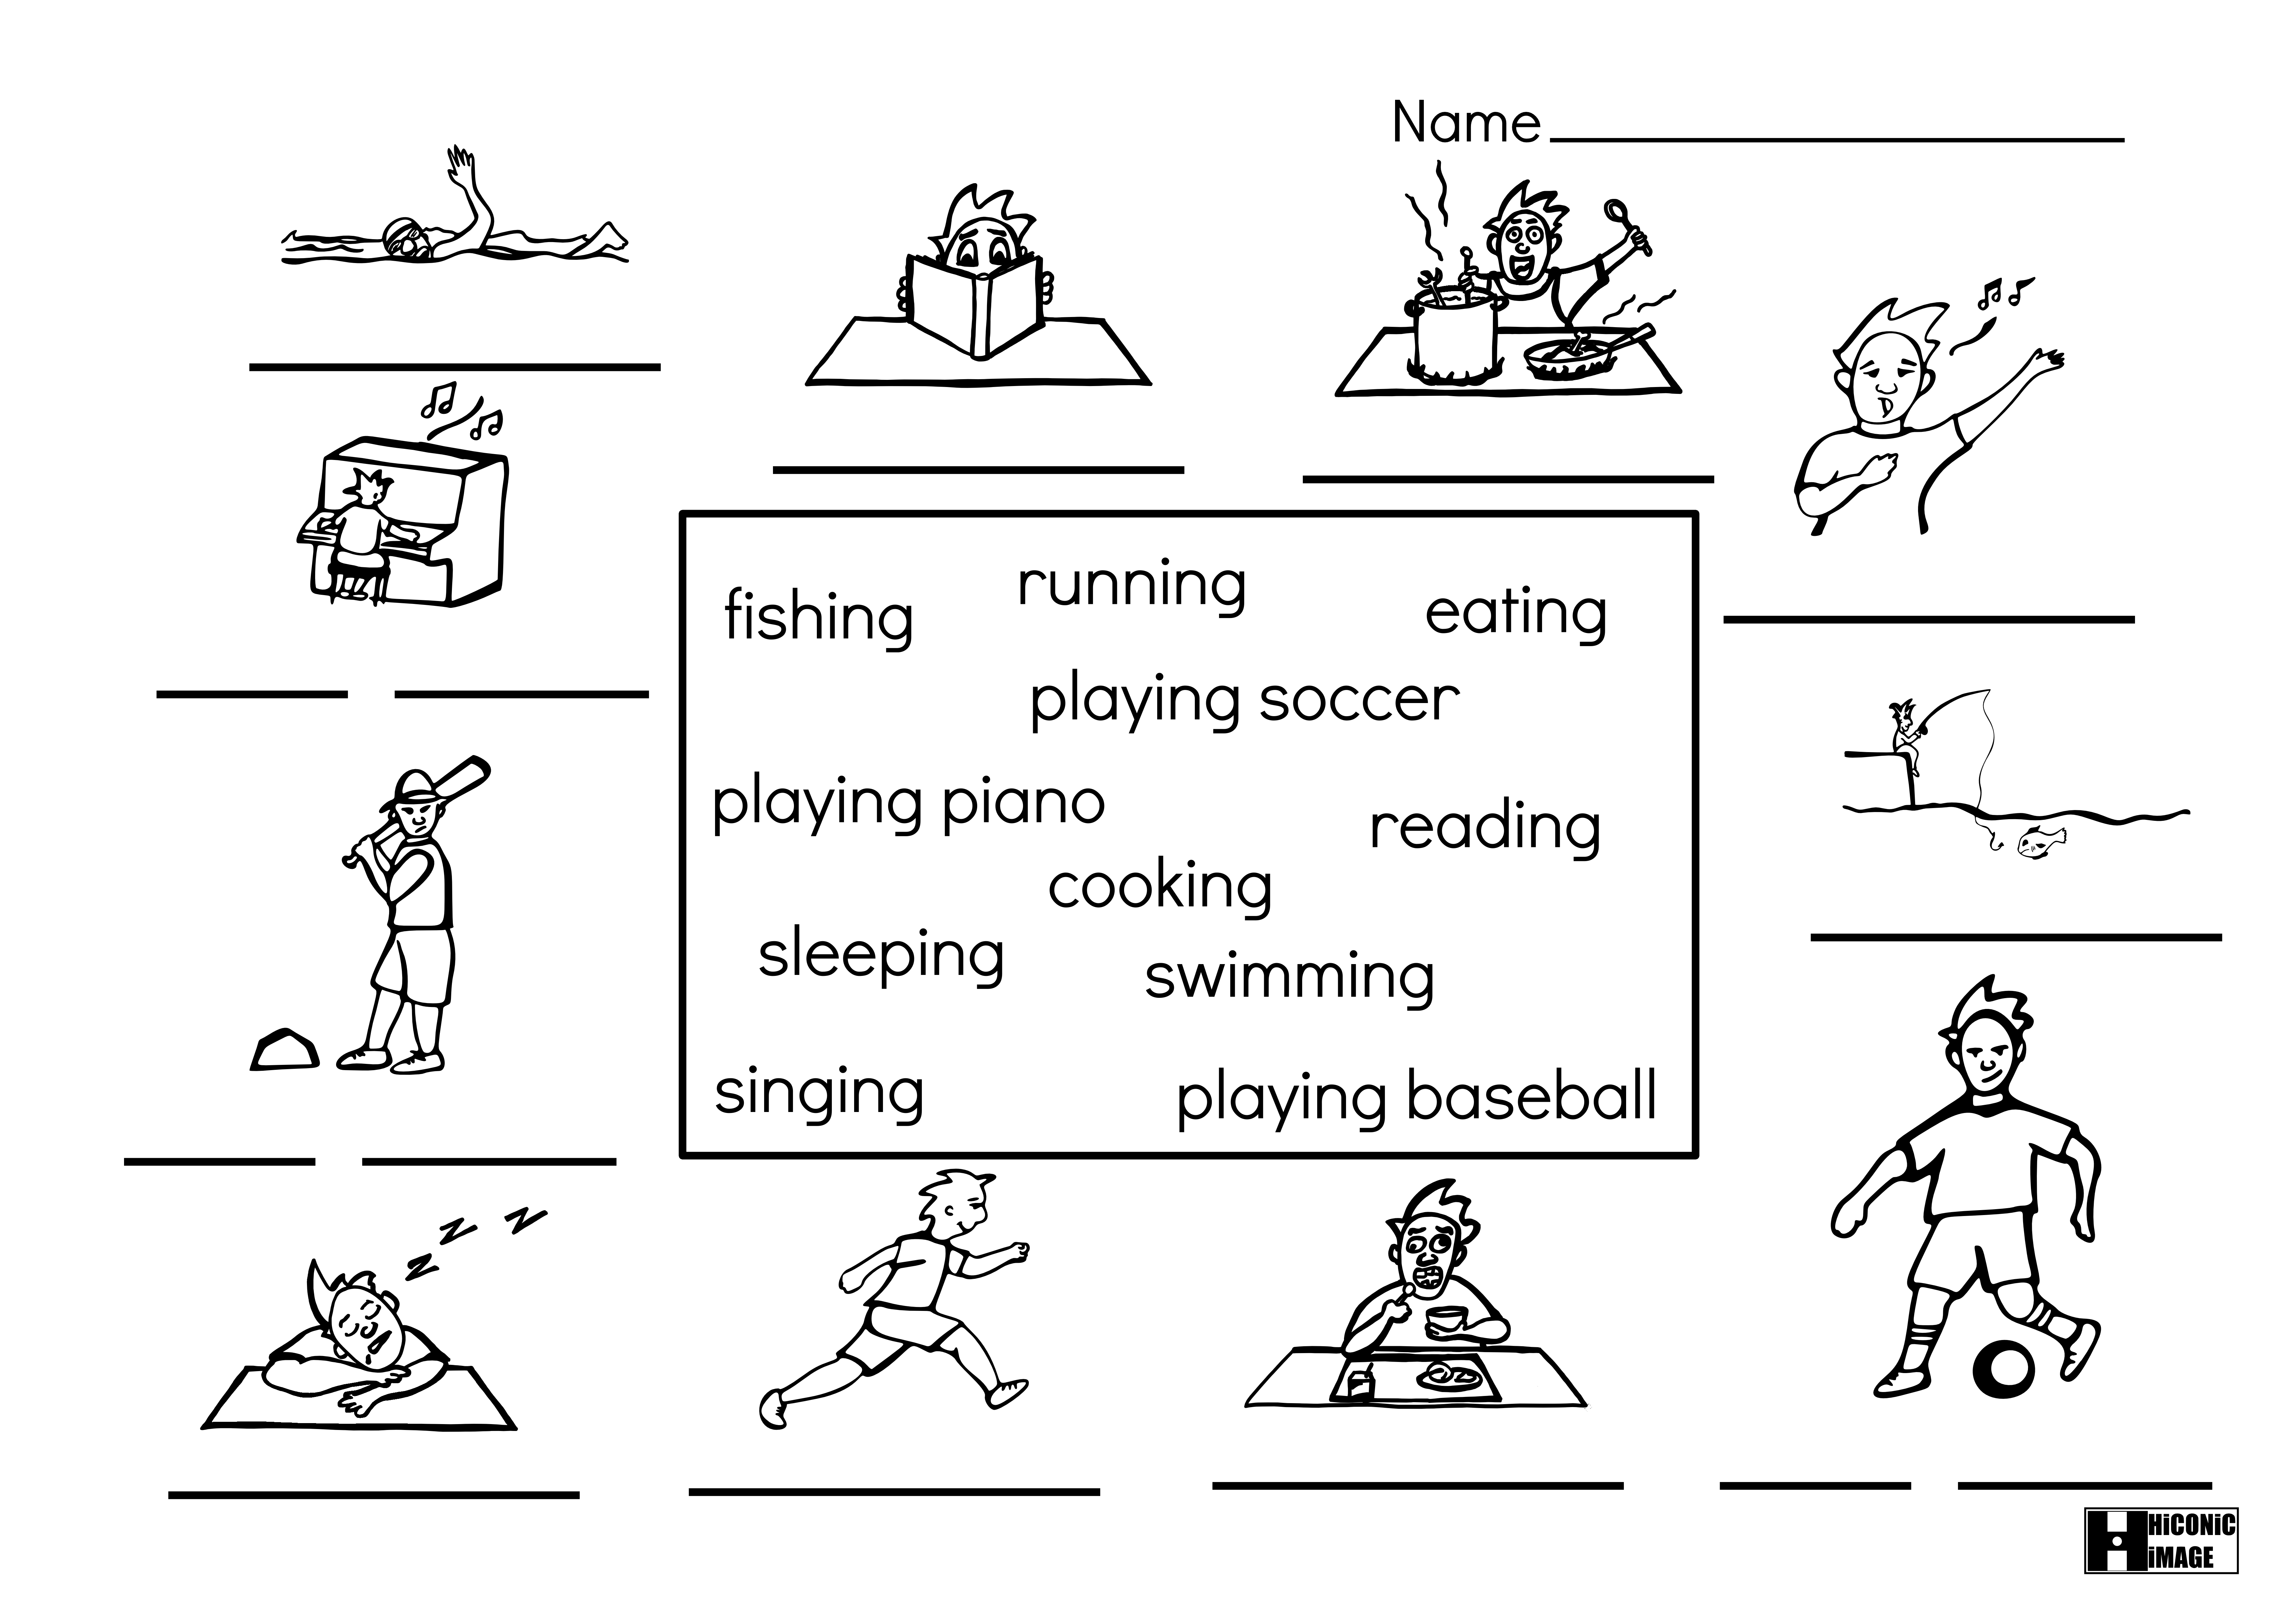 11-best-images-of-pe-activity-worksheets-ing-worksheets-grade-1-physical-education-record